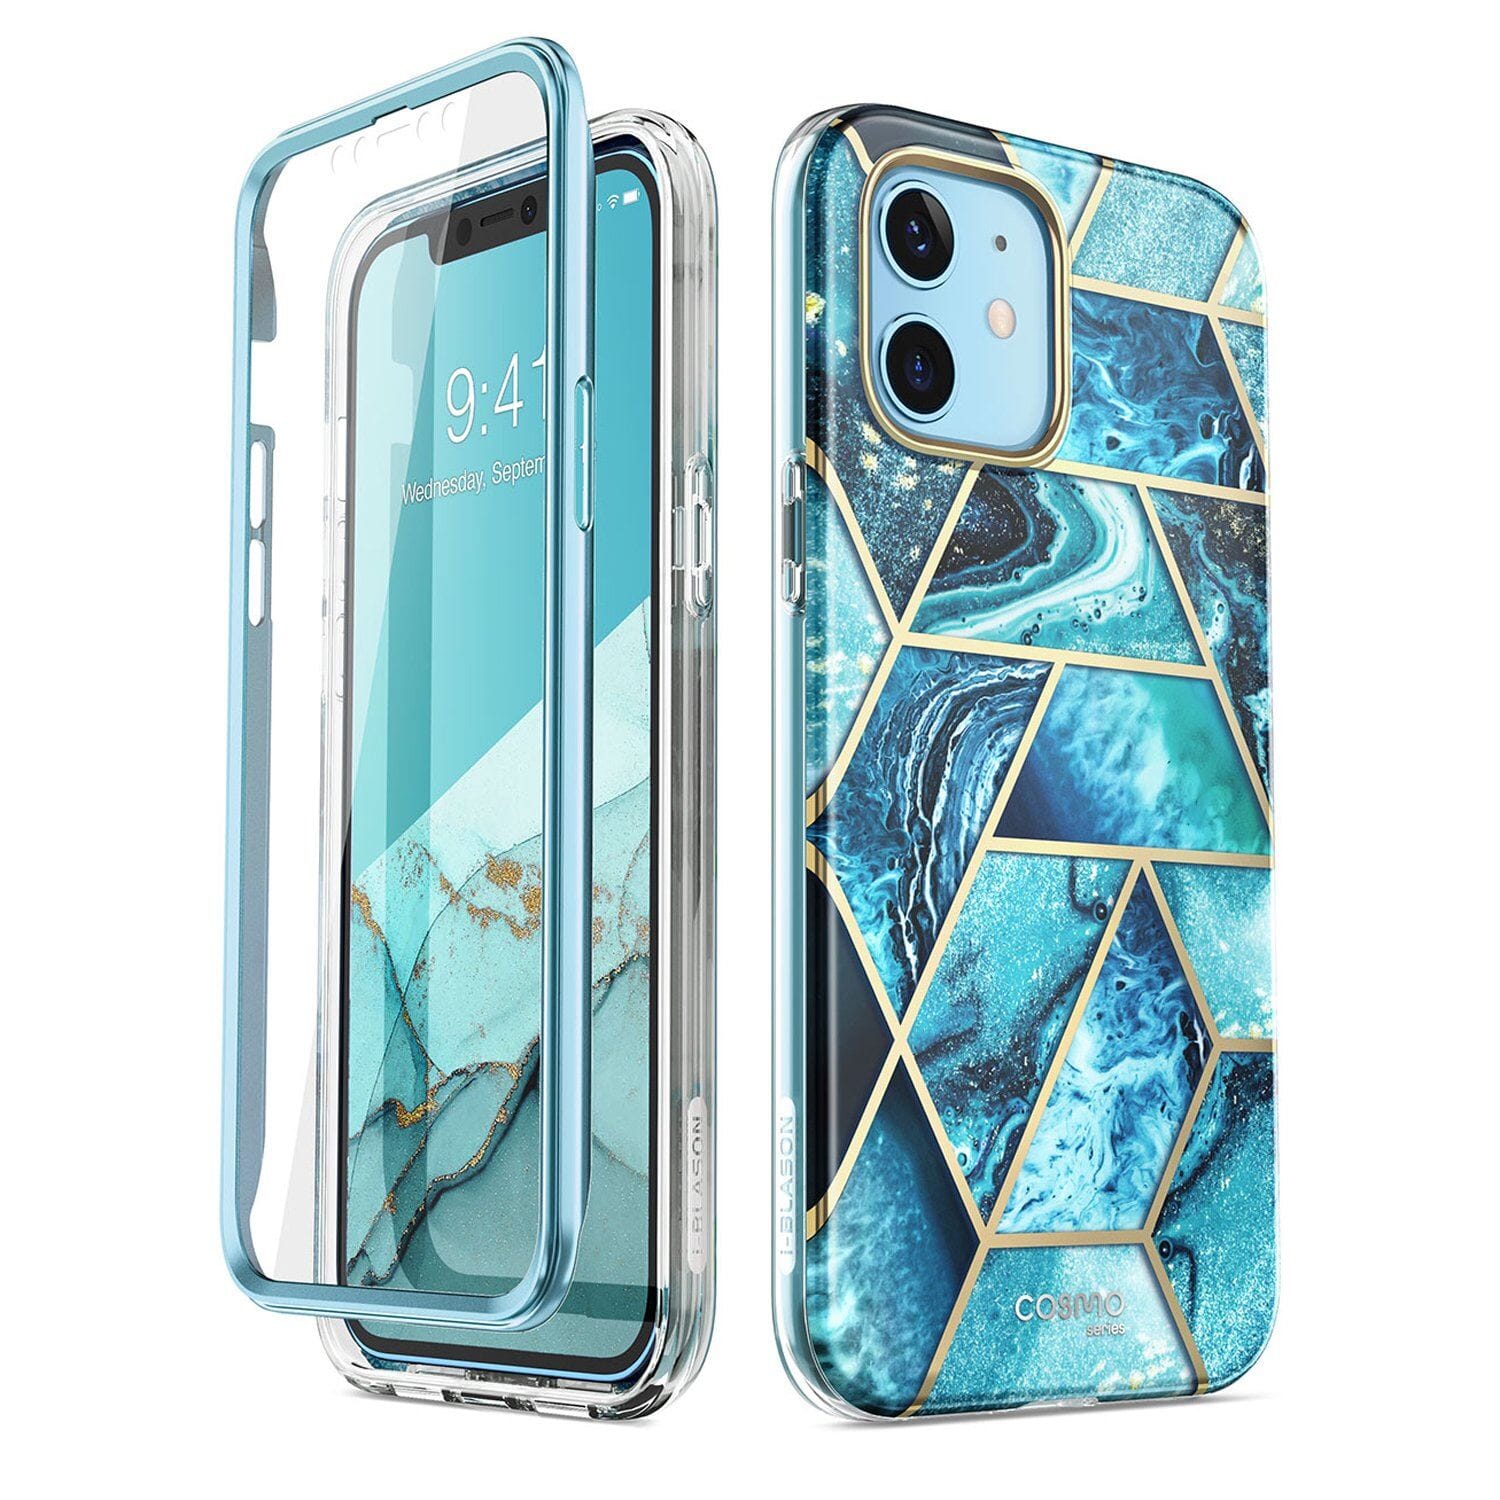 i-Blason Cosmo Series Slim Full-Body Stylish Protective Case for iPhone 12 Series (2020)(With Build-in Screen Protector) iPhone 12 Series i-Blason Ocean iPhone 12/12 Pro 6.1" 